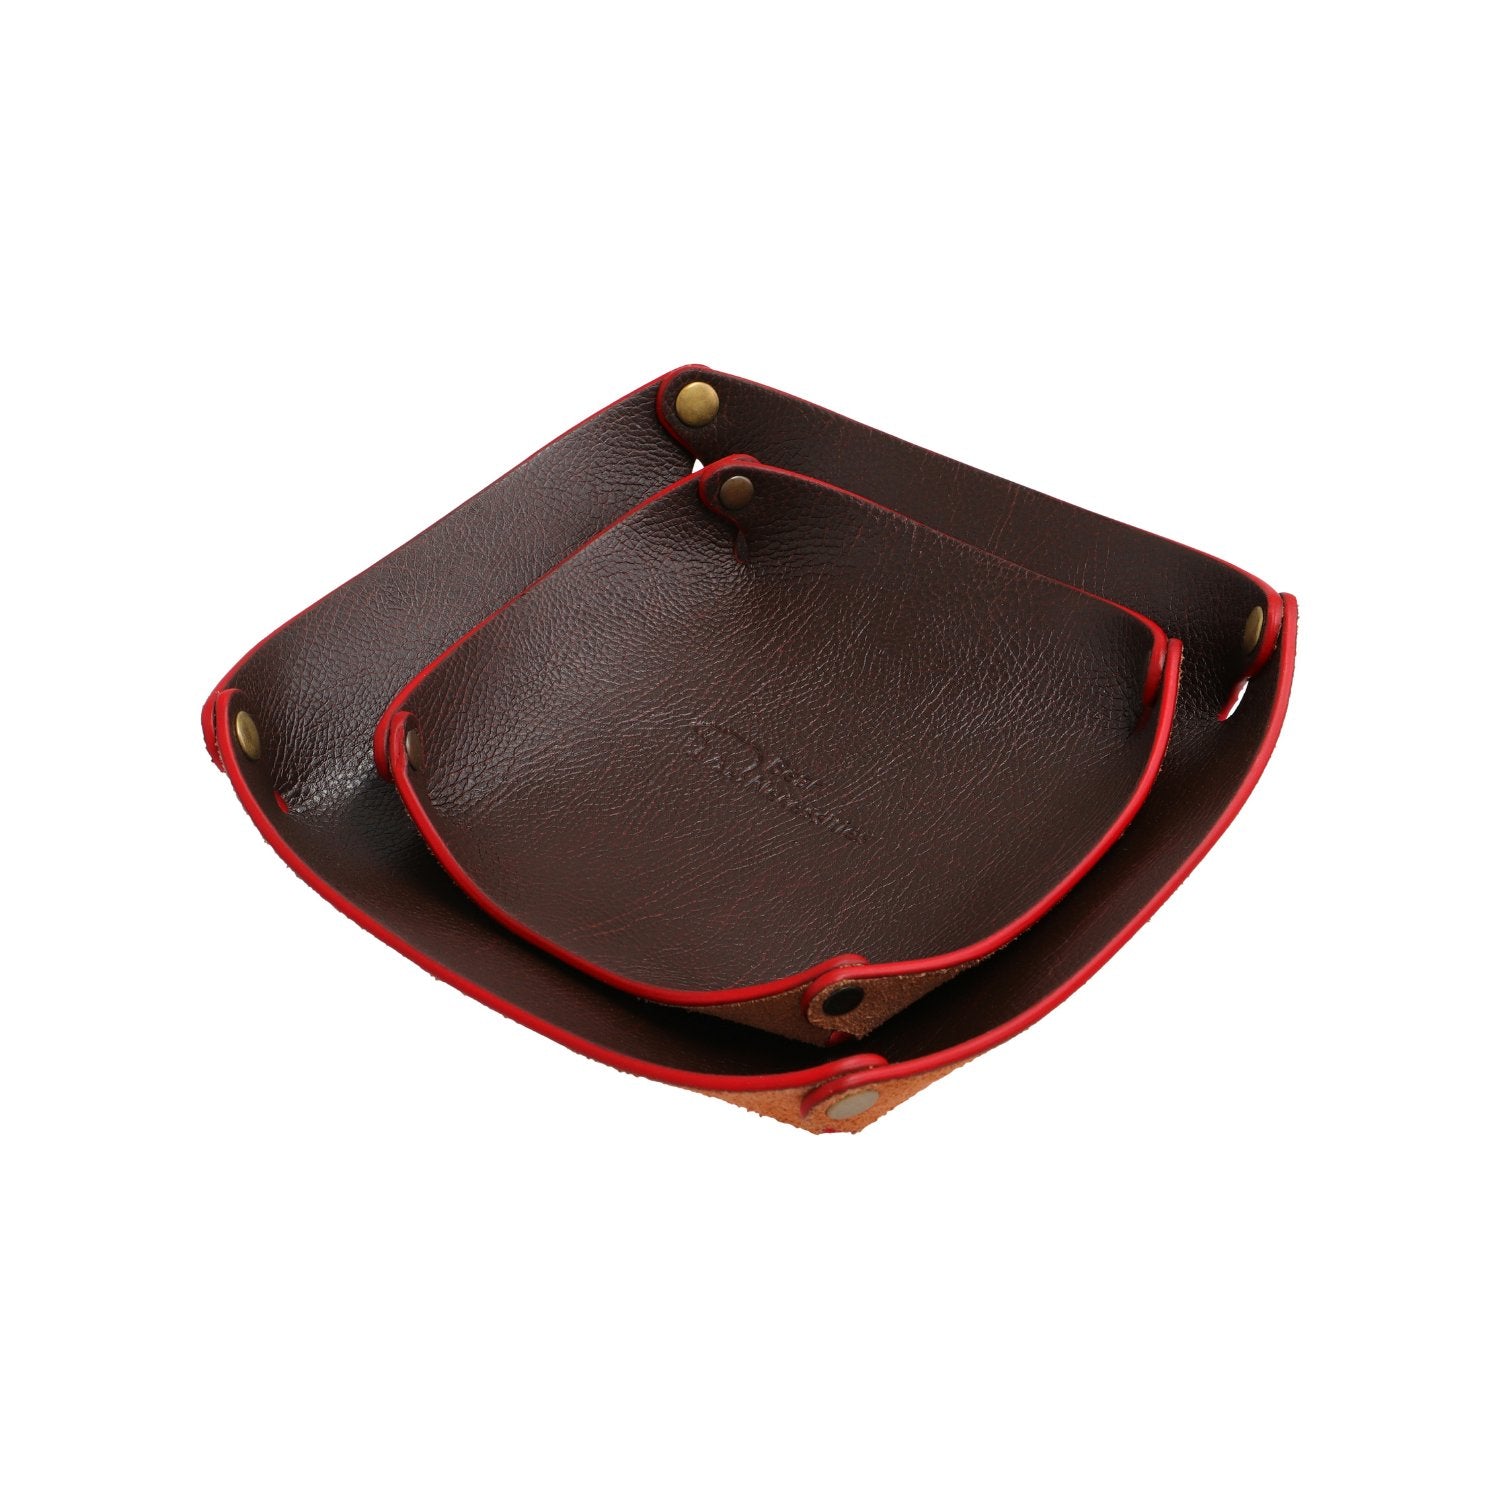 Cartch-All Tray - Brown